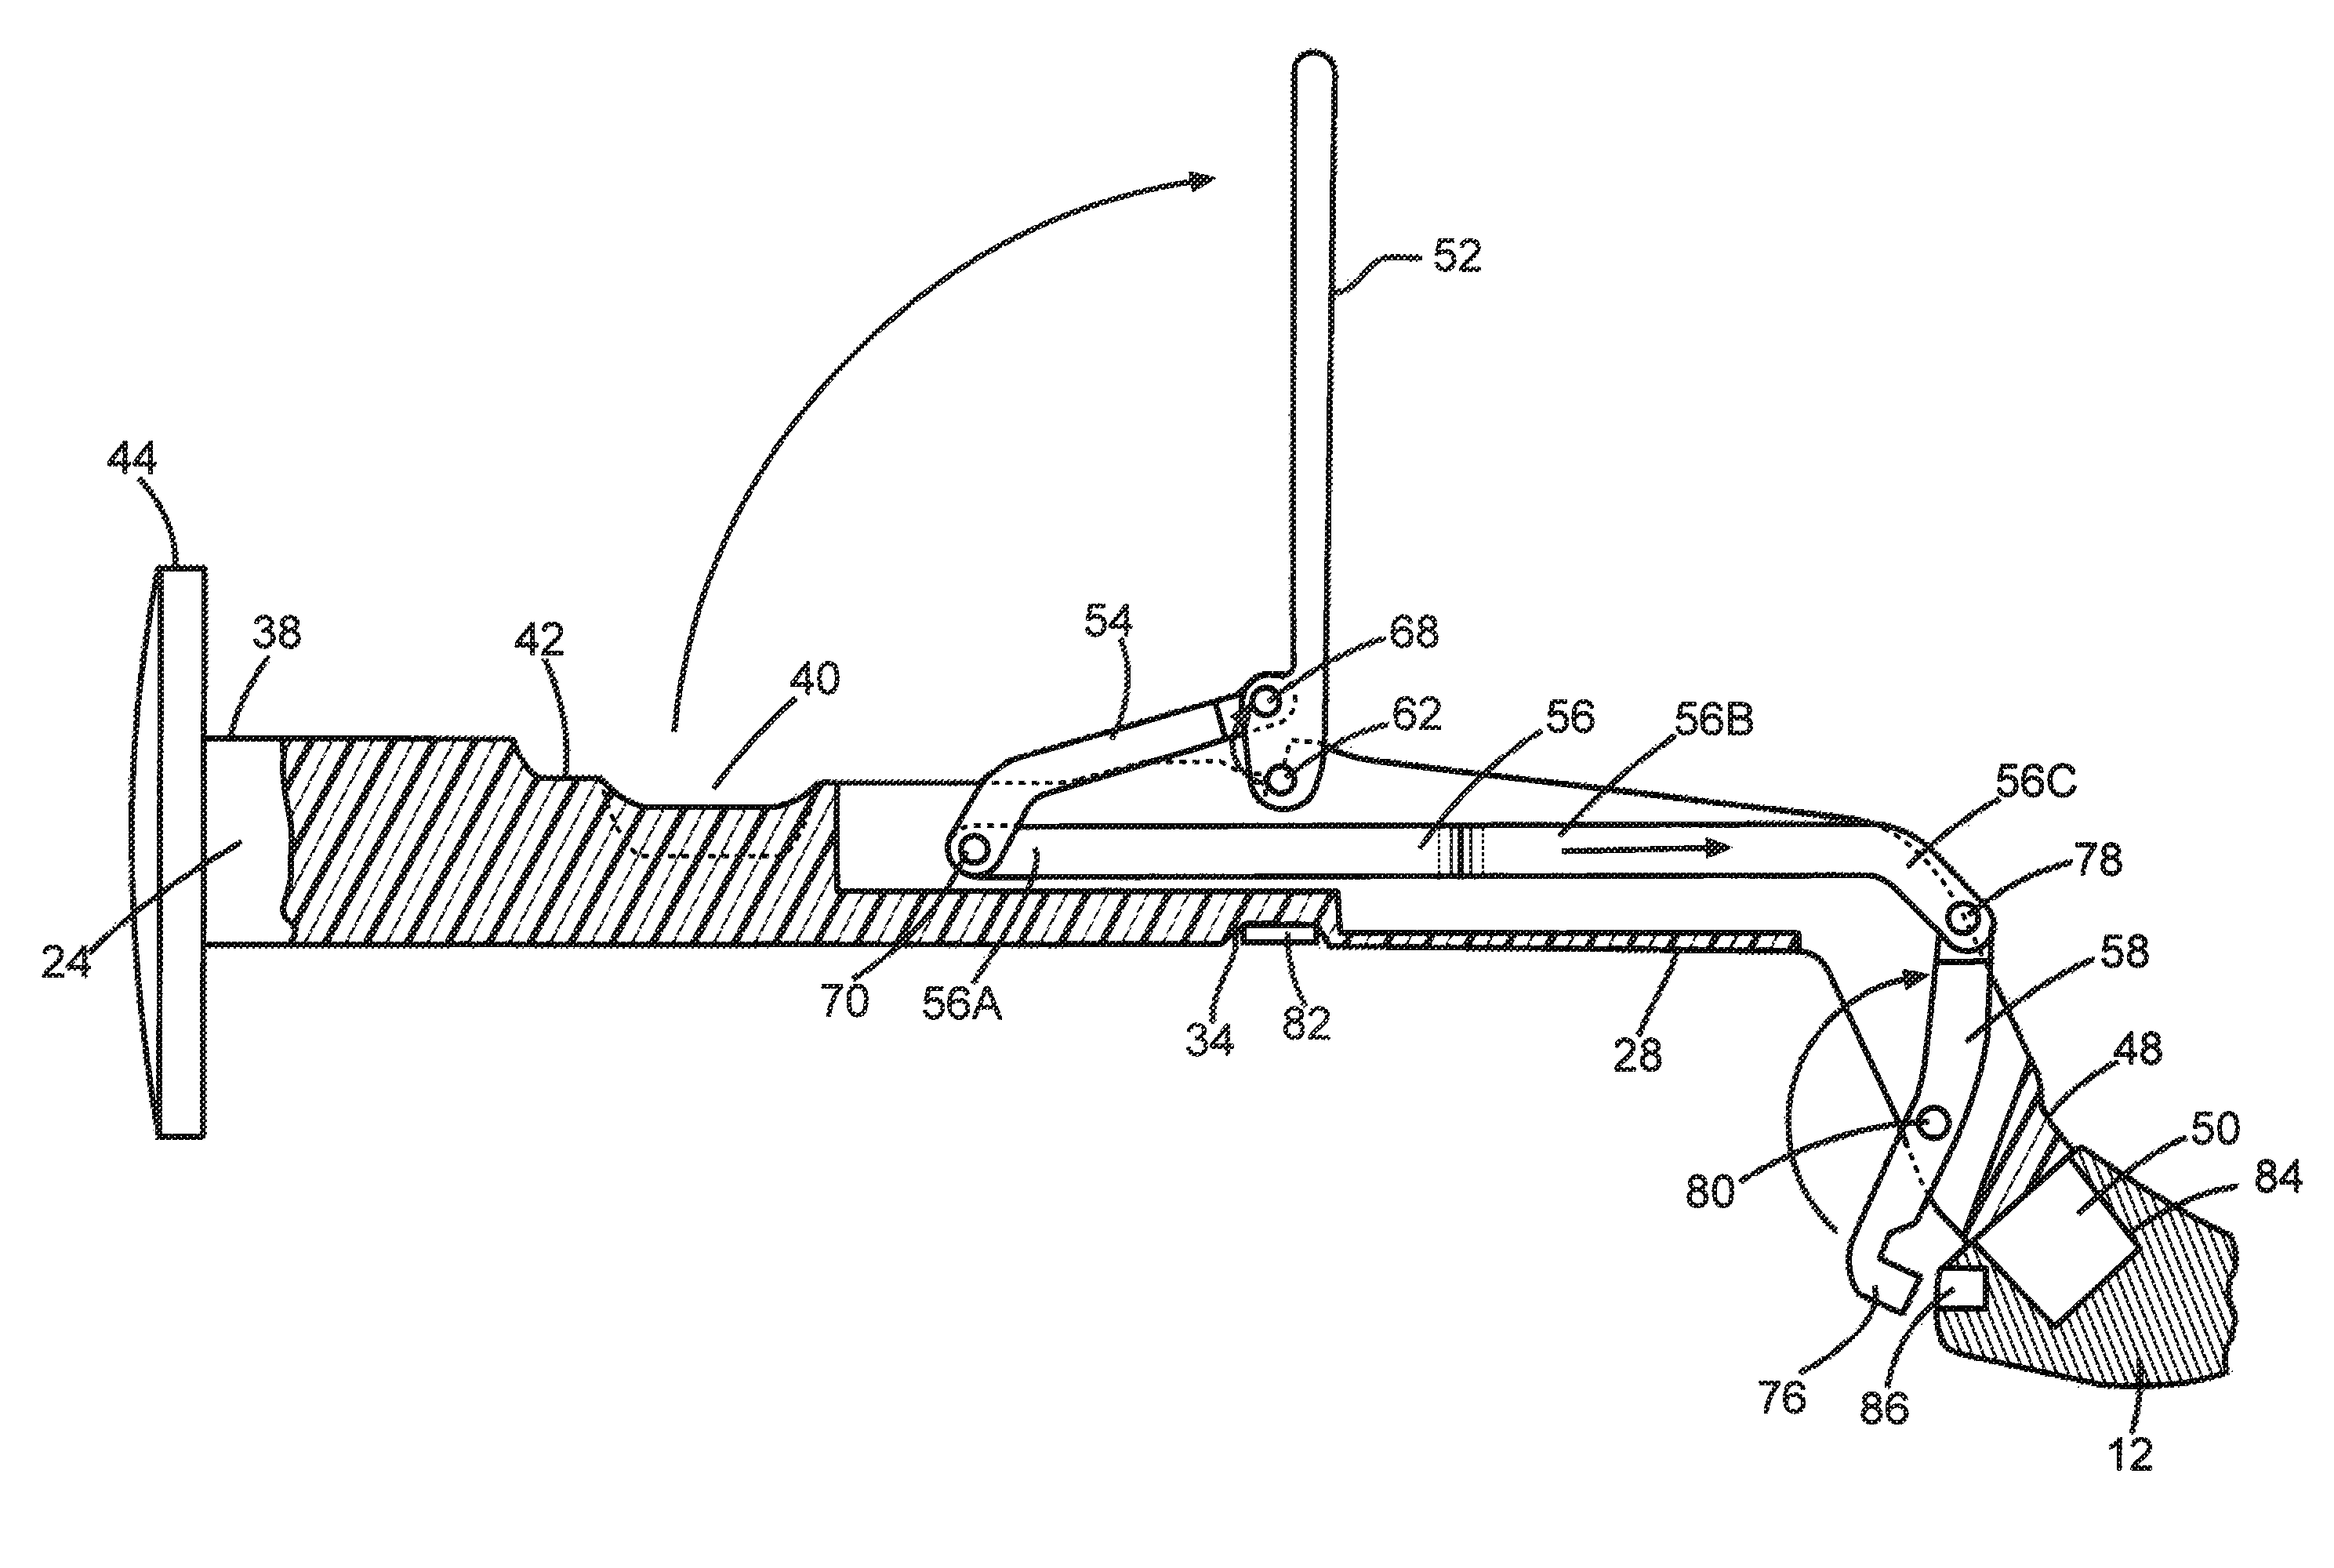 Double offset surgical tool handle assembly to provide greater offset from the coronal plane